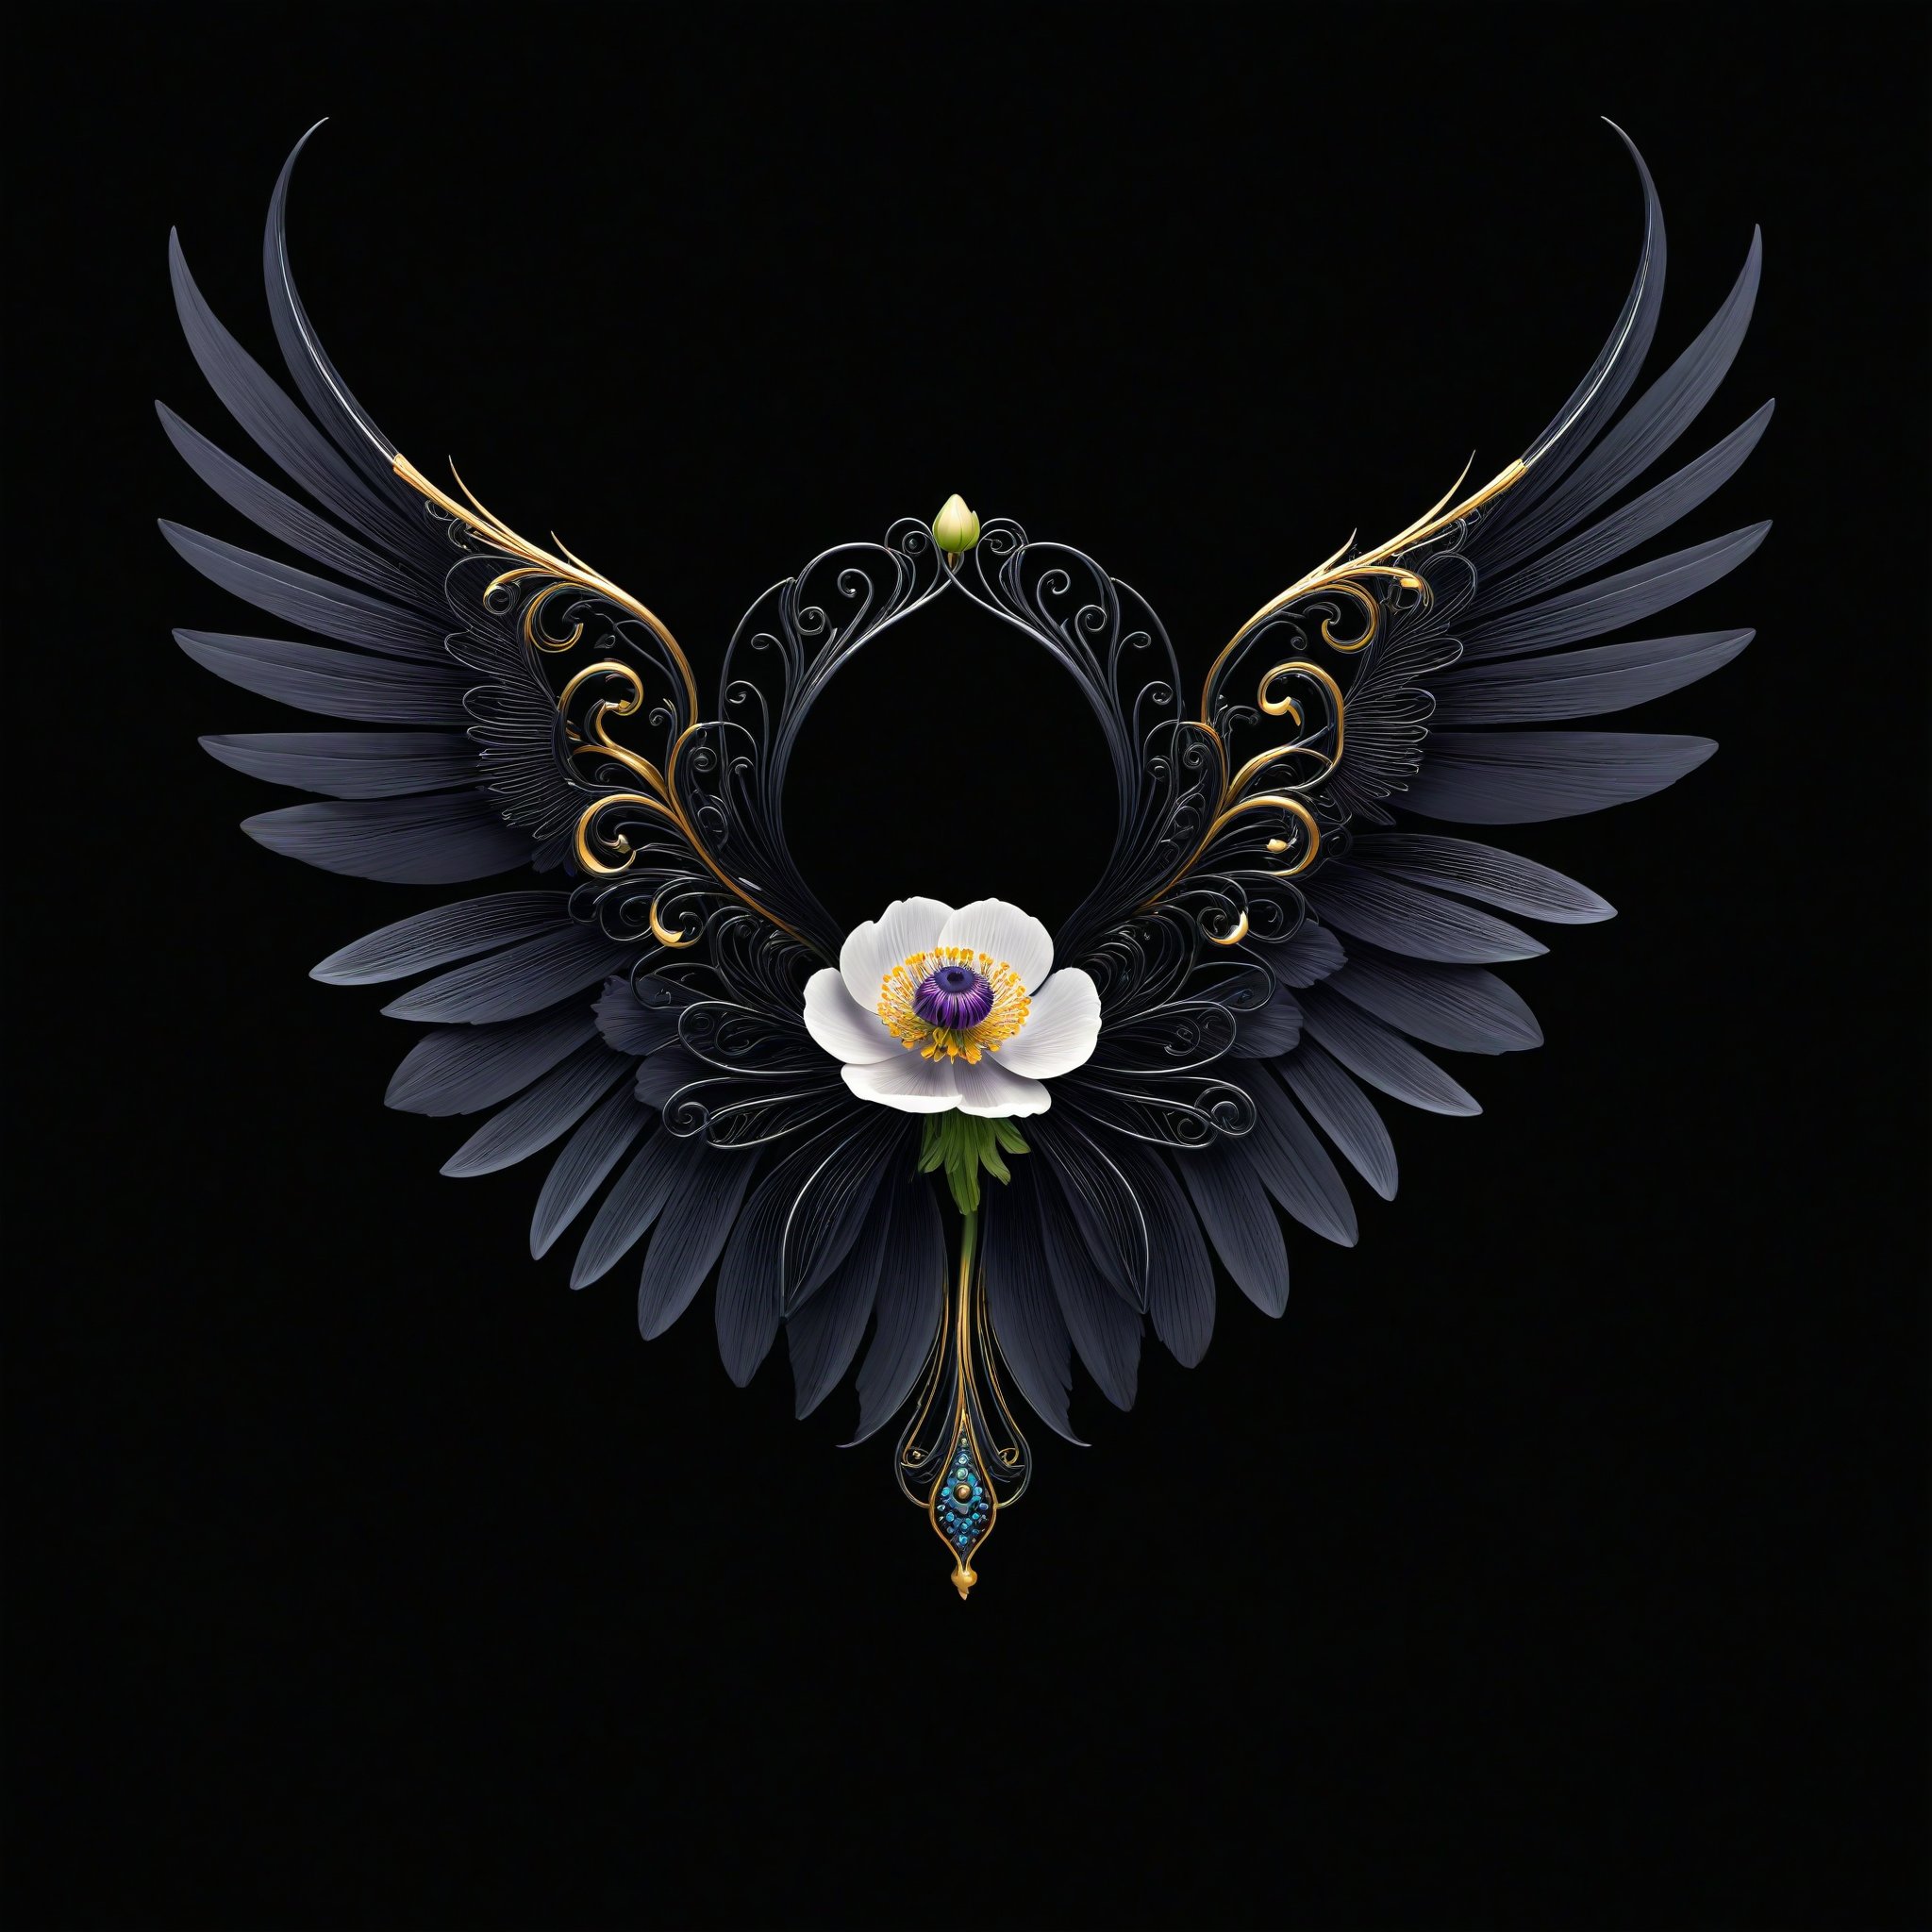 a anemone flower whit wing majestic with clasic ornament Mechanical lines Elegance T-shirt design, BLACK BACKGROUND